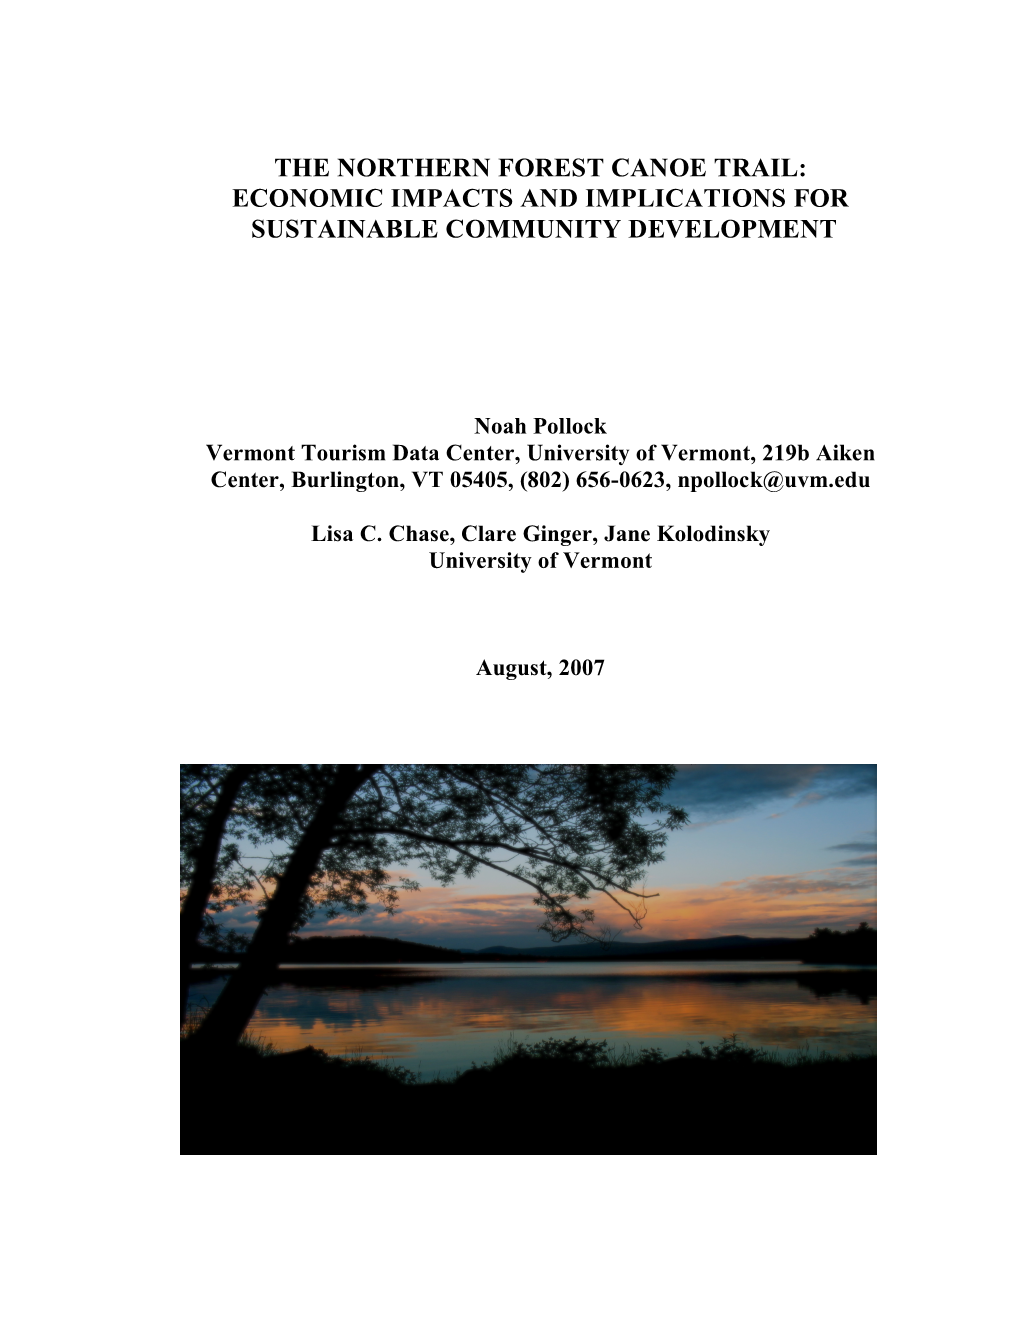 The Northern Forest Canoe Trail: Economic Impacts and Implications for Sustainable Community Development